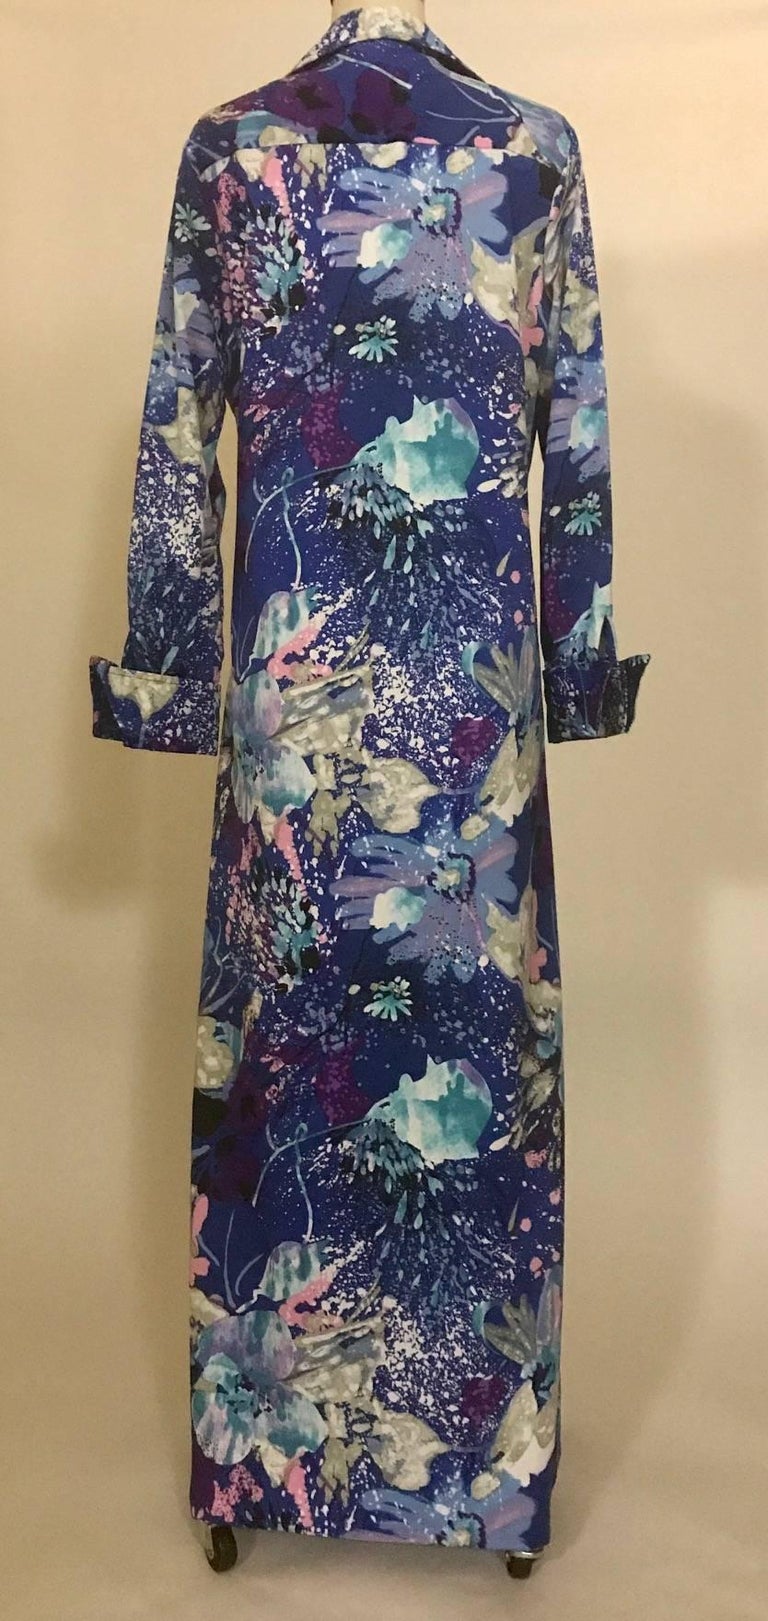 Tori Richard for I. Magnin 1970s long maxi length shirt dress in an abstract floral and ocean spray Hawaiian print. Button front with cloth covered buttons. Cuff detail at sleeves with decorative buttons.

Add a simple tied cloth or rope belt at